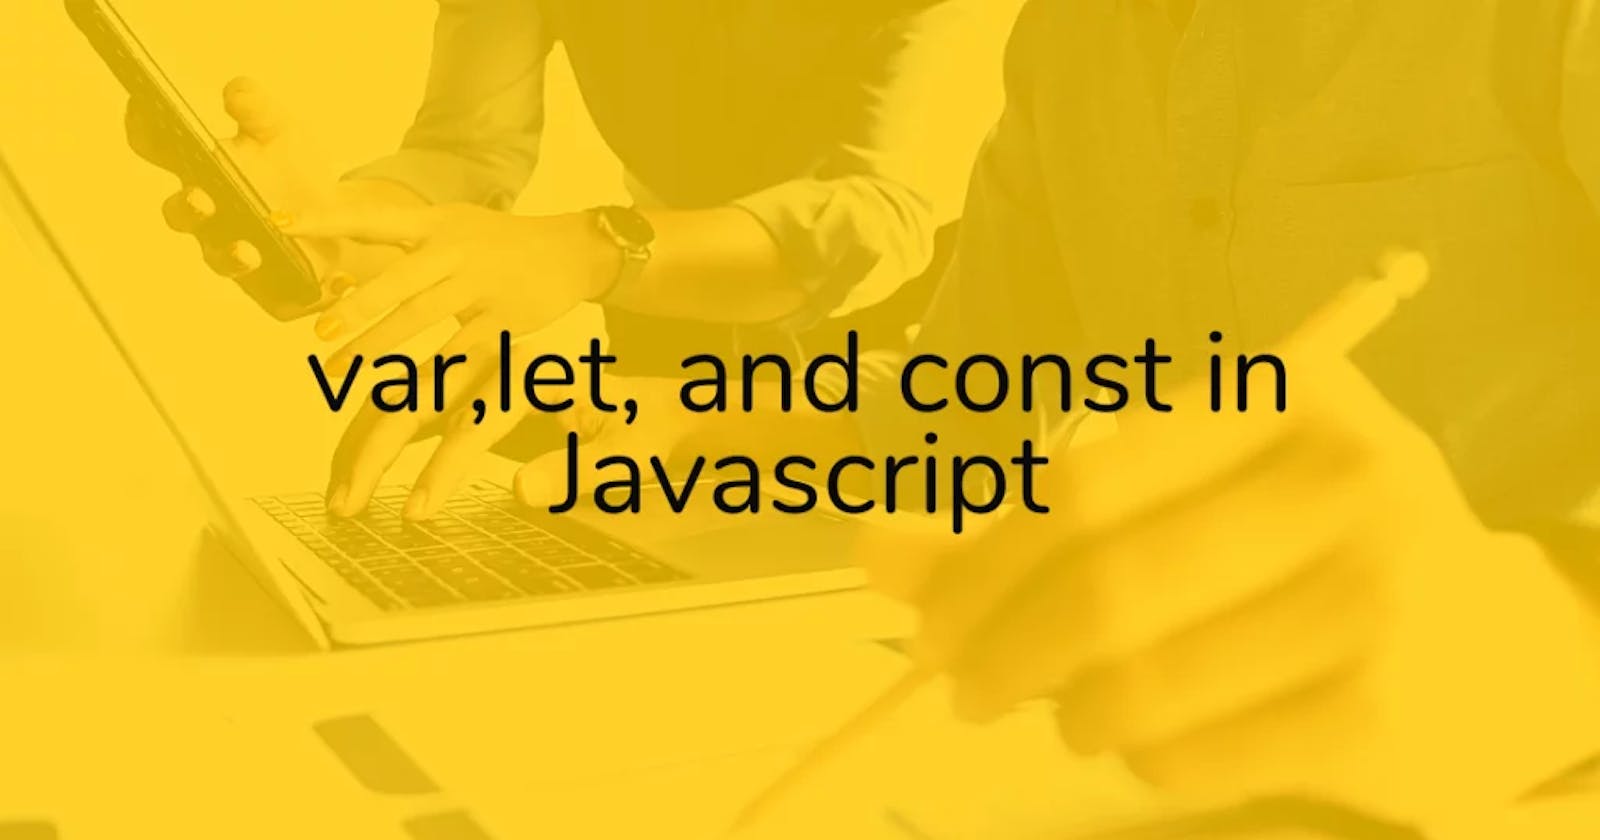 var, let, and const in Javascript.